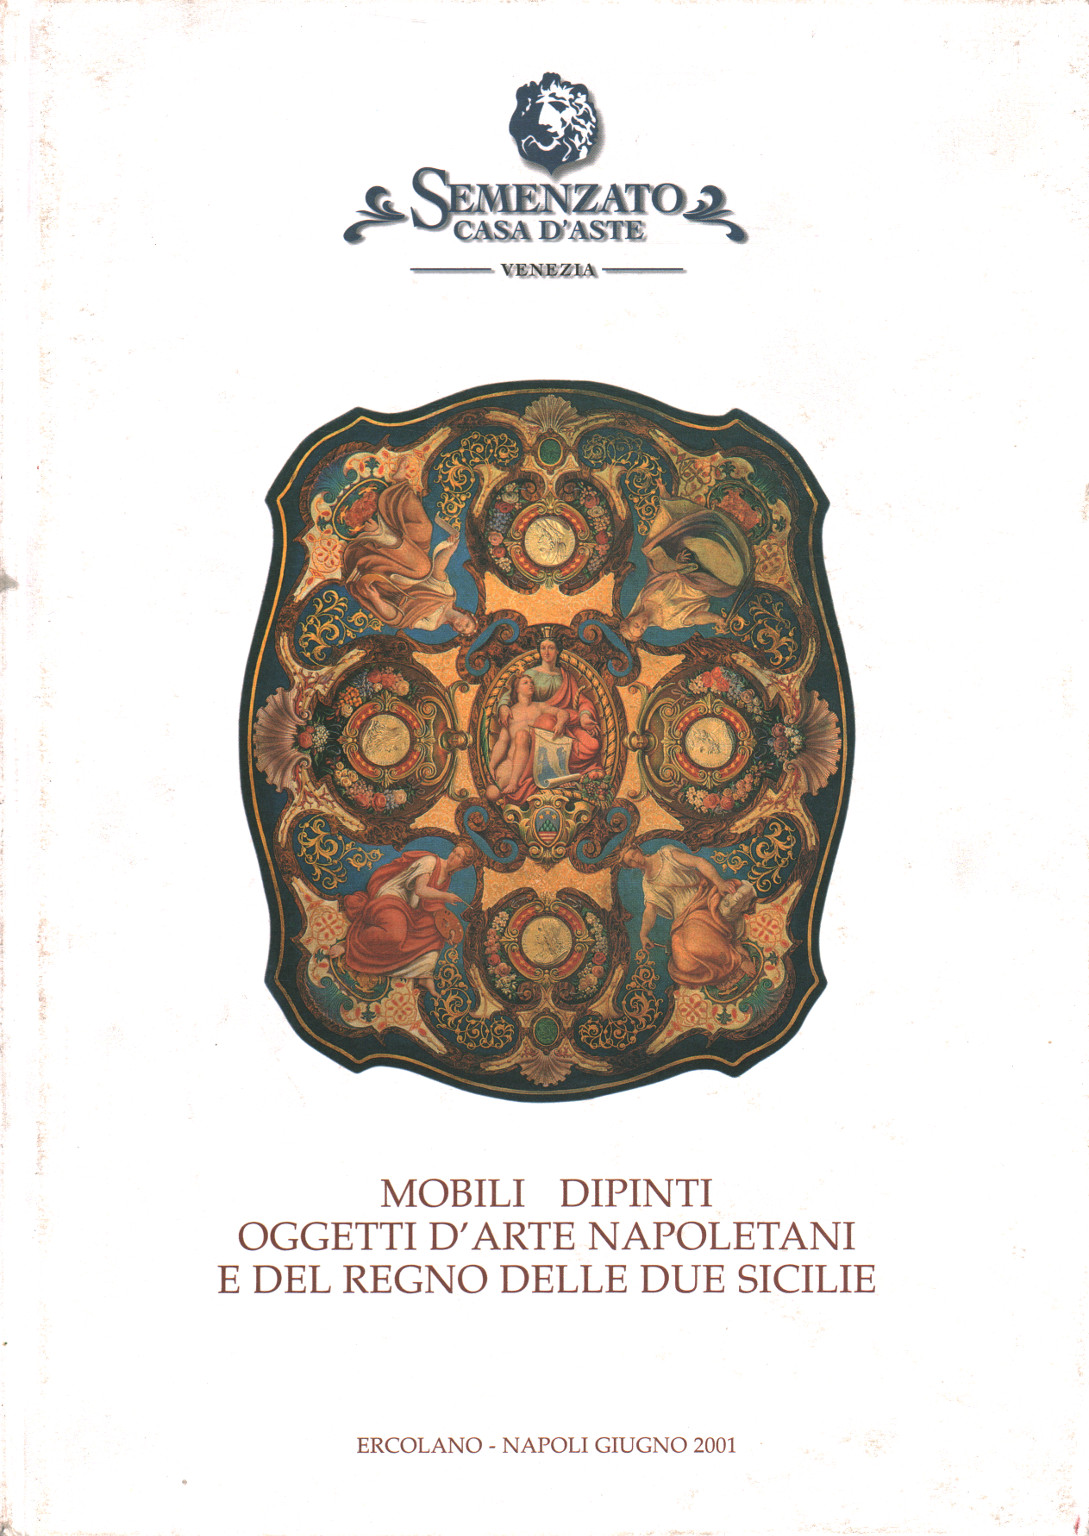 Antique furniture and paintings, Neapolitan art objects and the kingdom of the two Sicilies